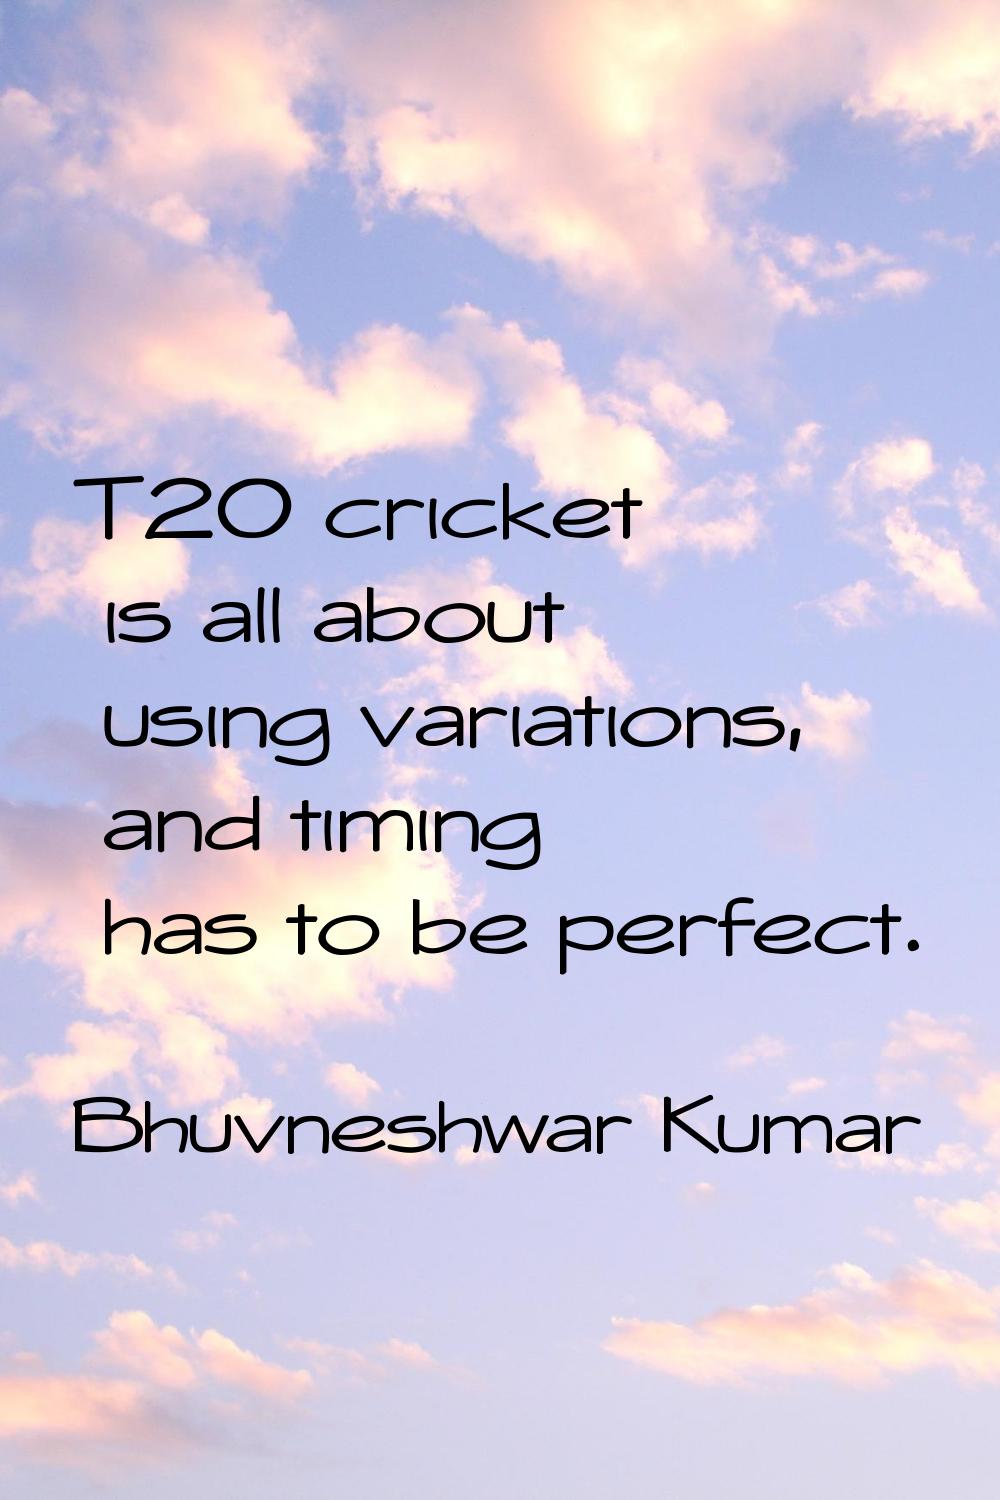 T20 cricket is all about using variations, and timing has to be perfect.